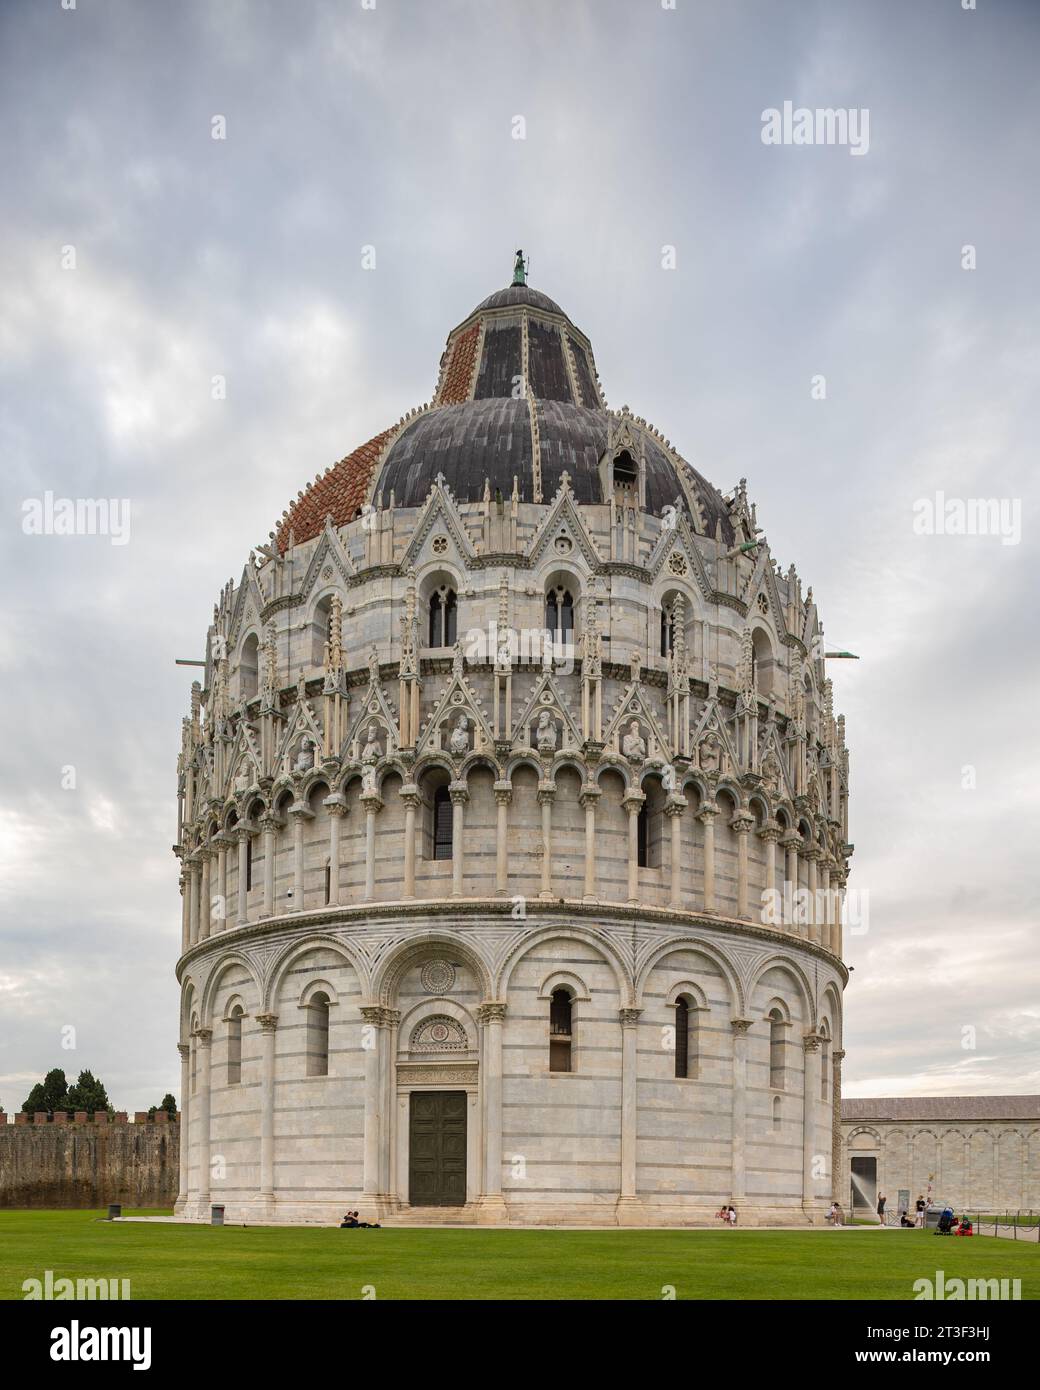 The Baptisterium on the Piazza dei Miracoli in Pisa, Italy Stock Photo